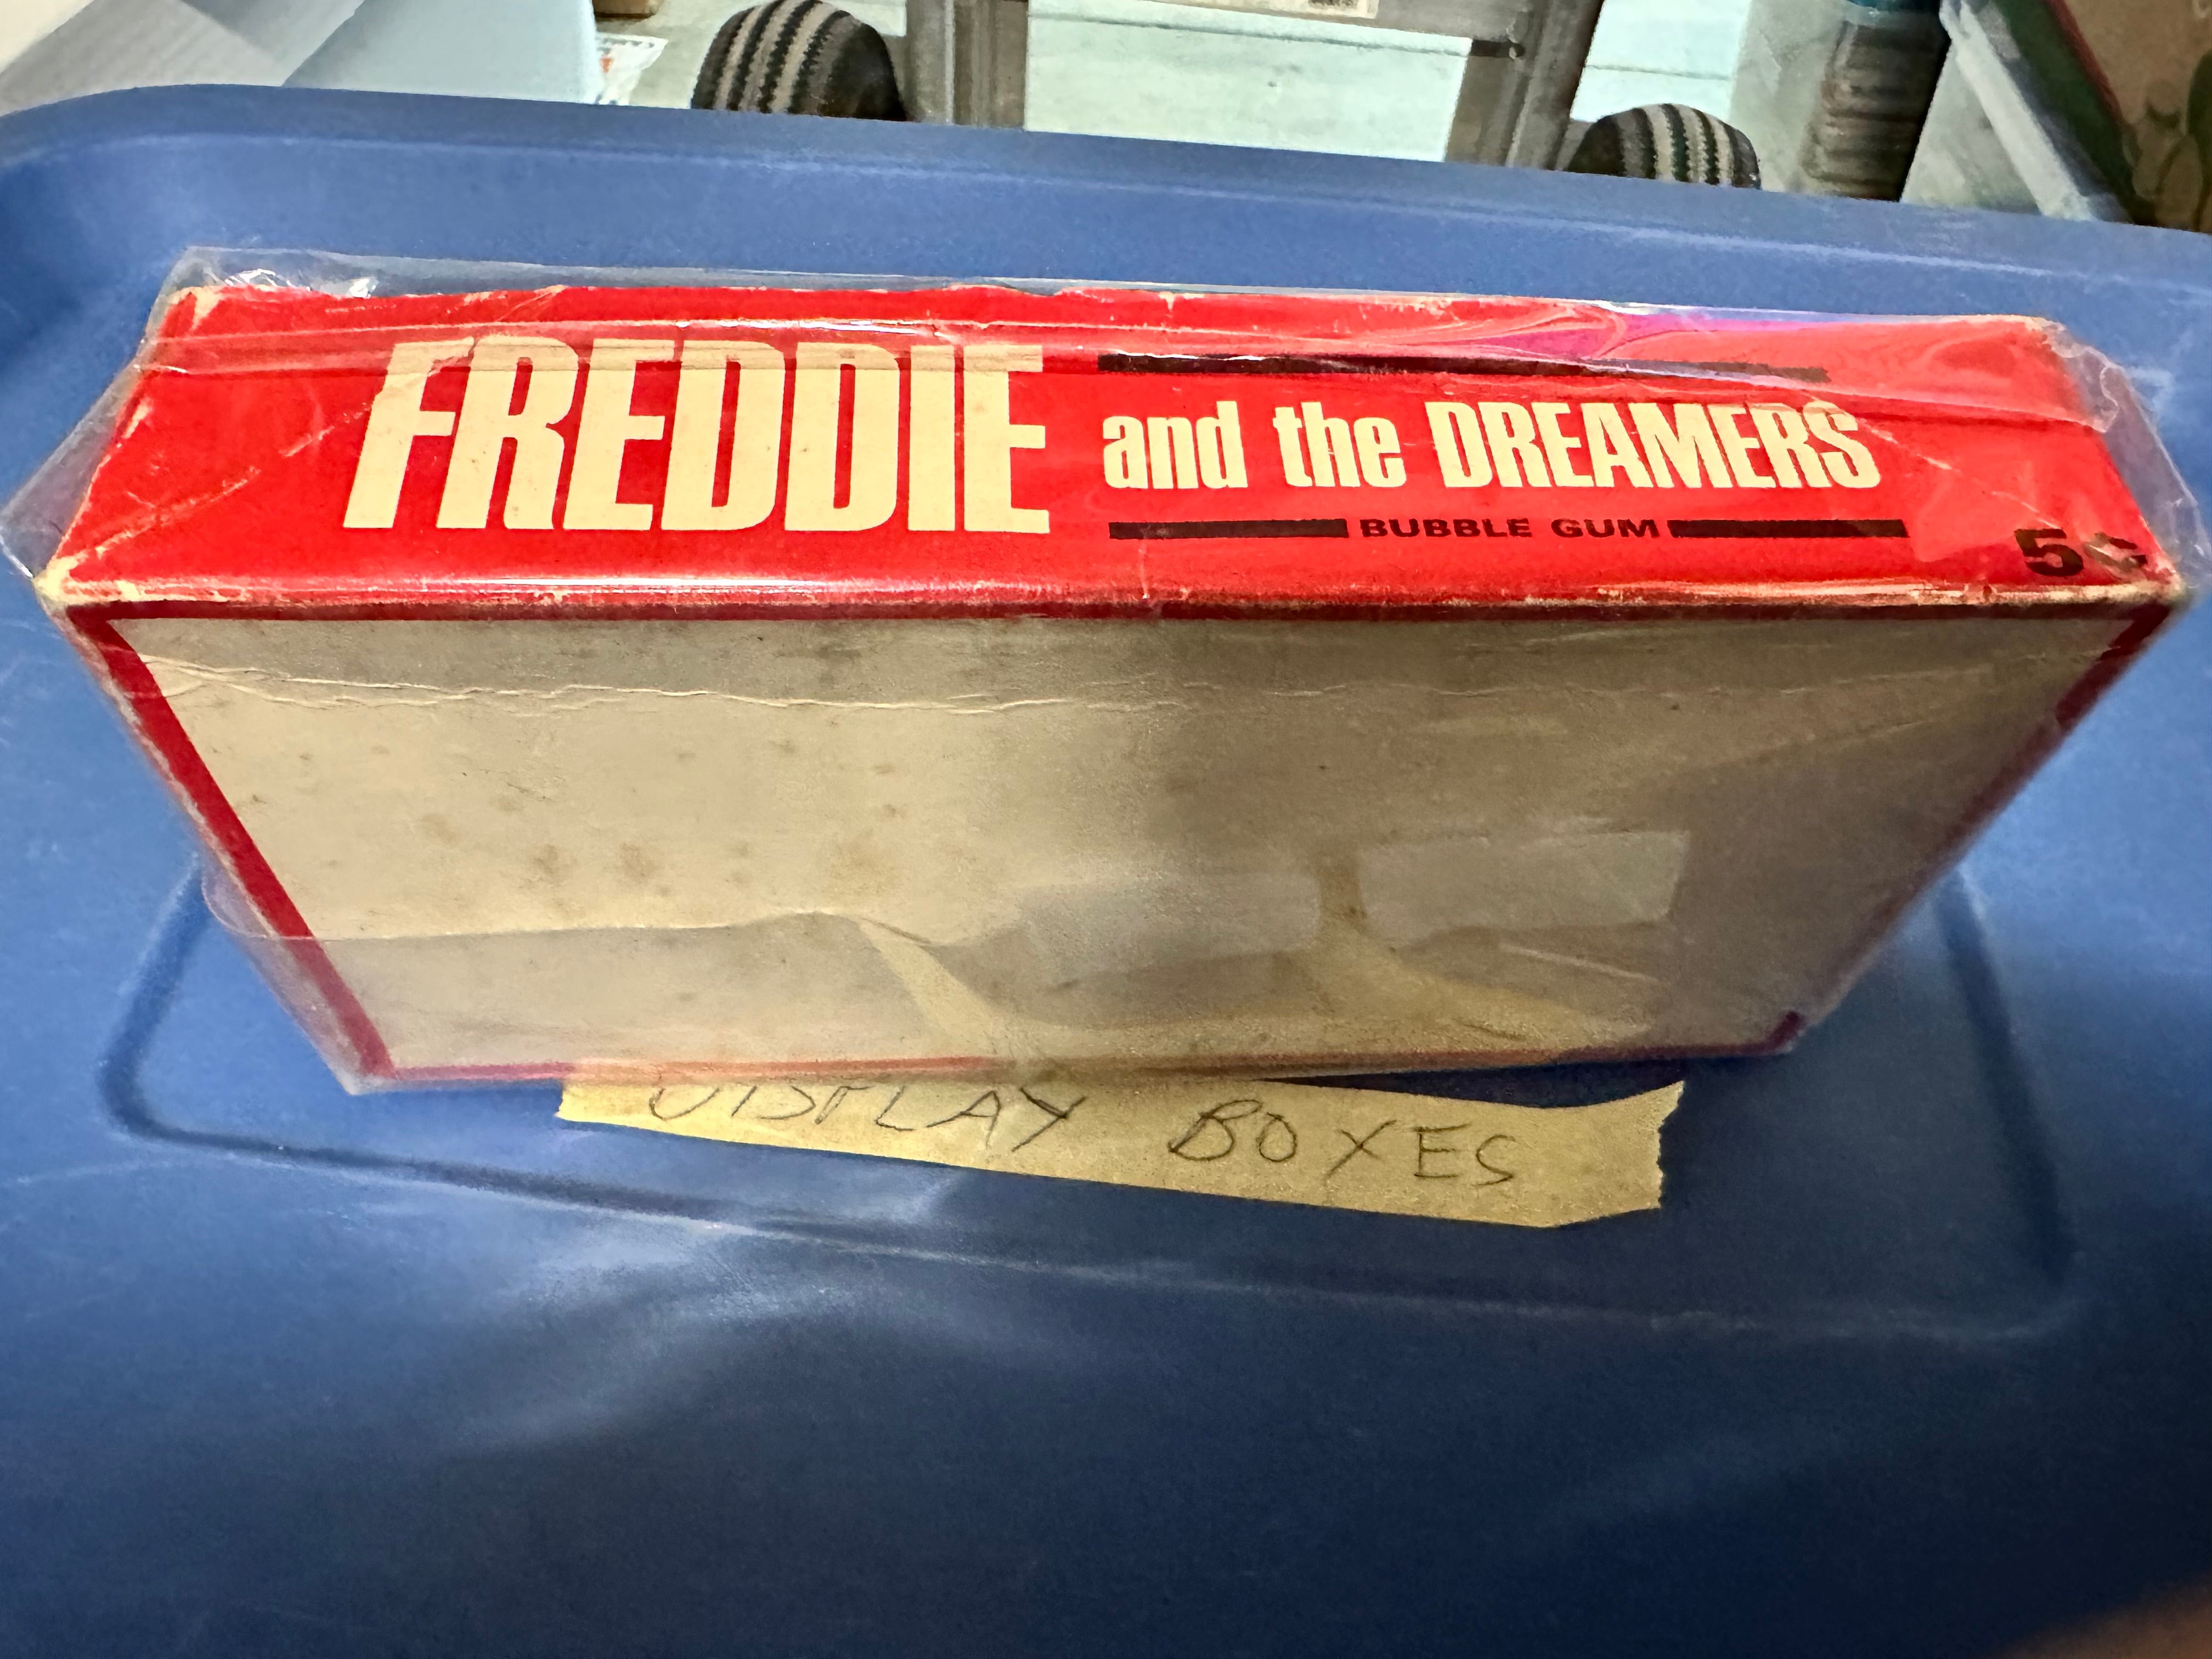 Freddie and the dreamers empty display box, 1958